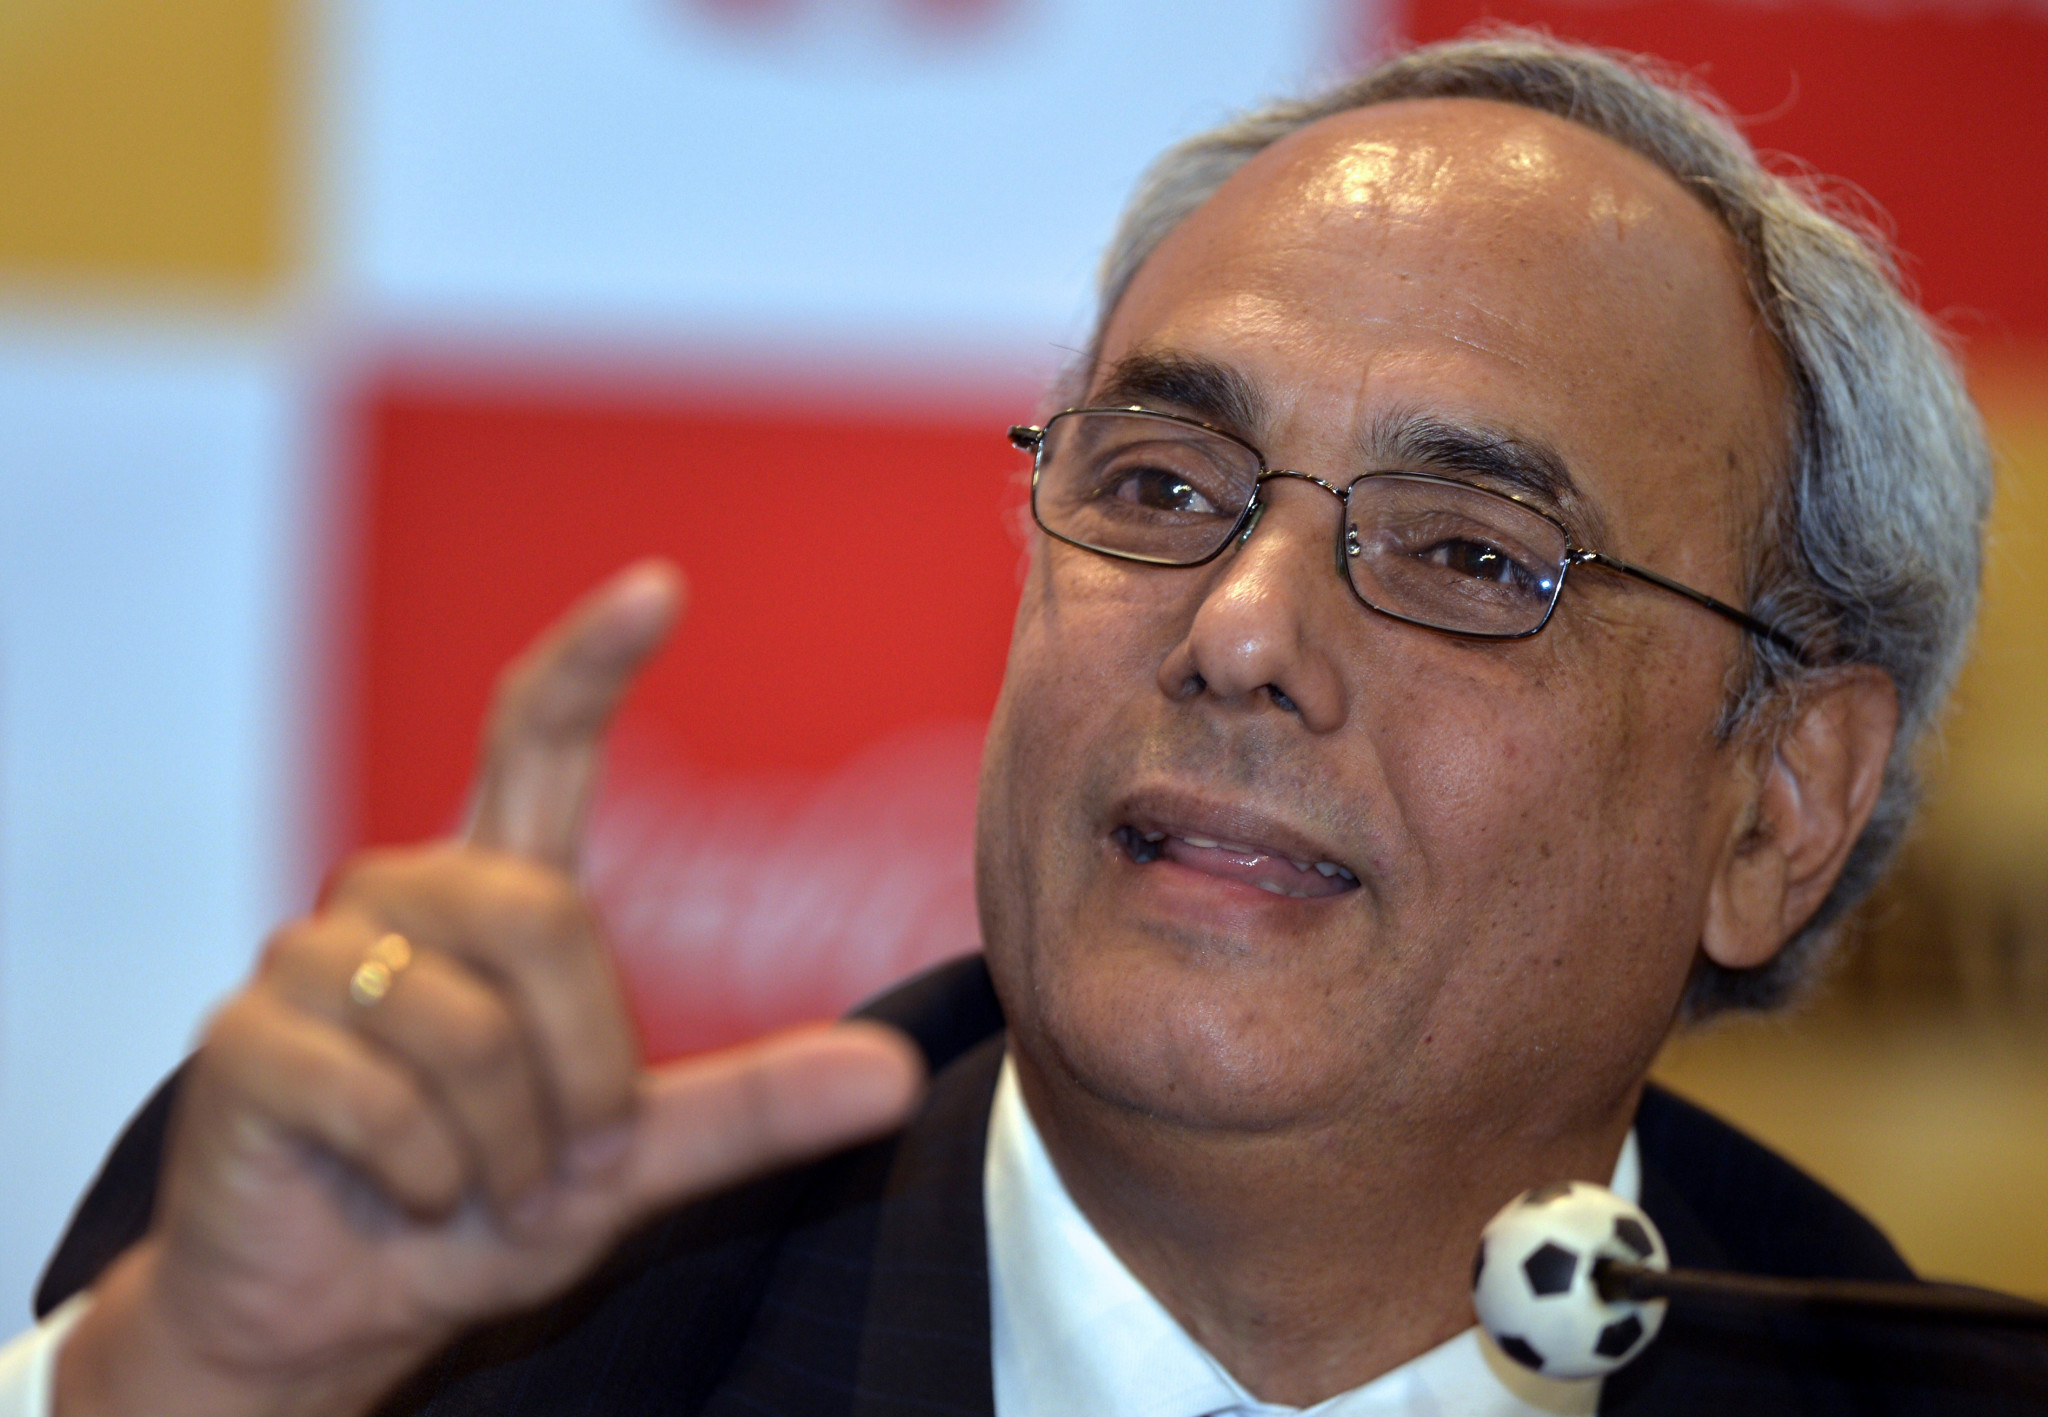 Former Peruvian FA President and CONMEBOL Executive Committee member banned for life by FIFA